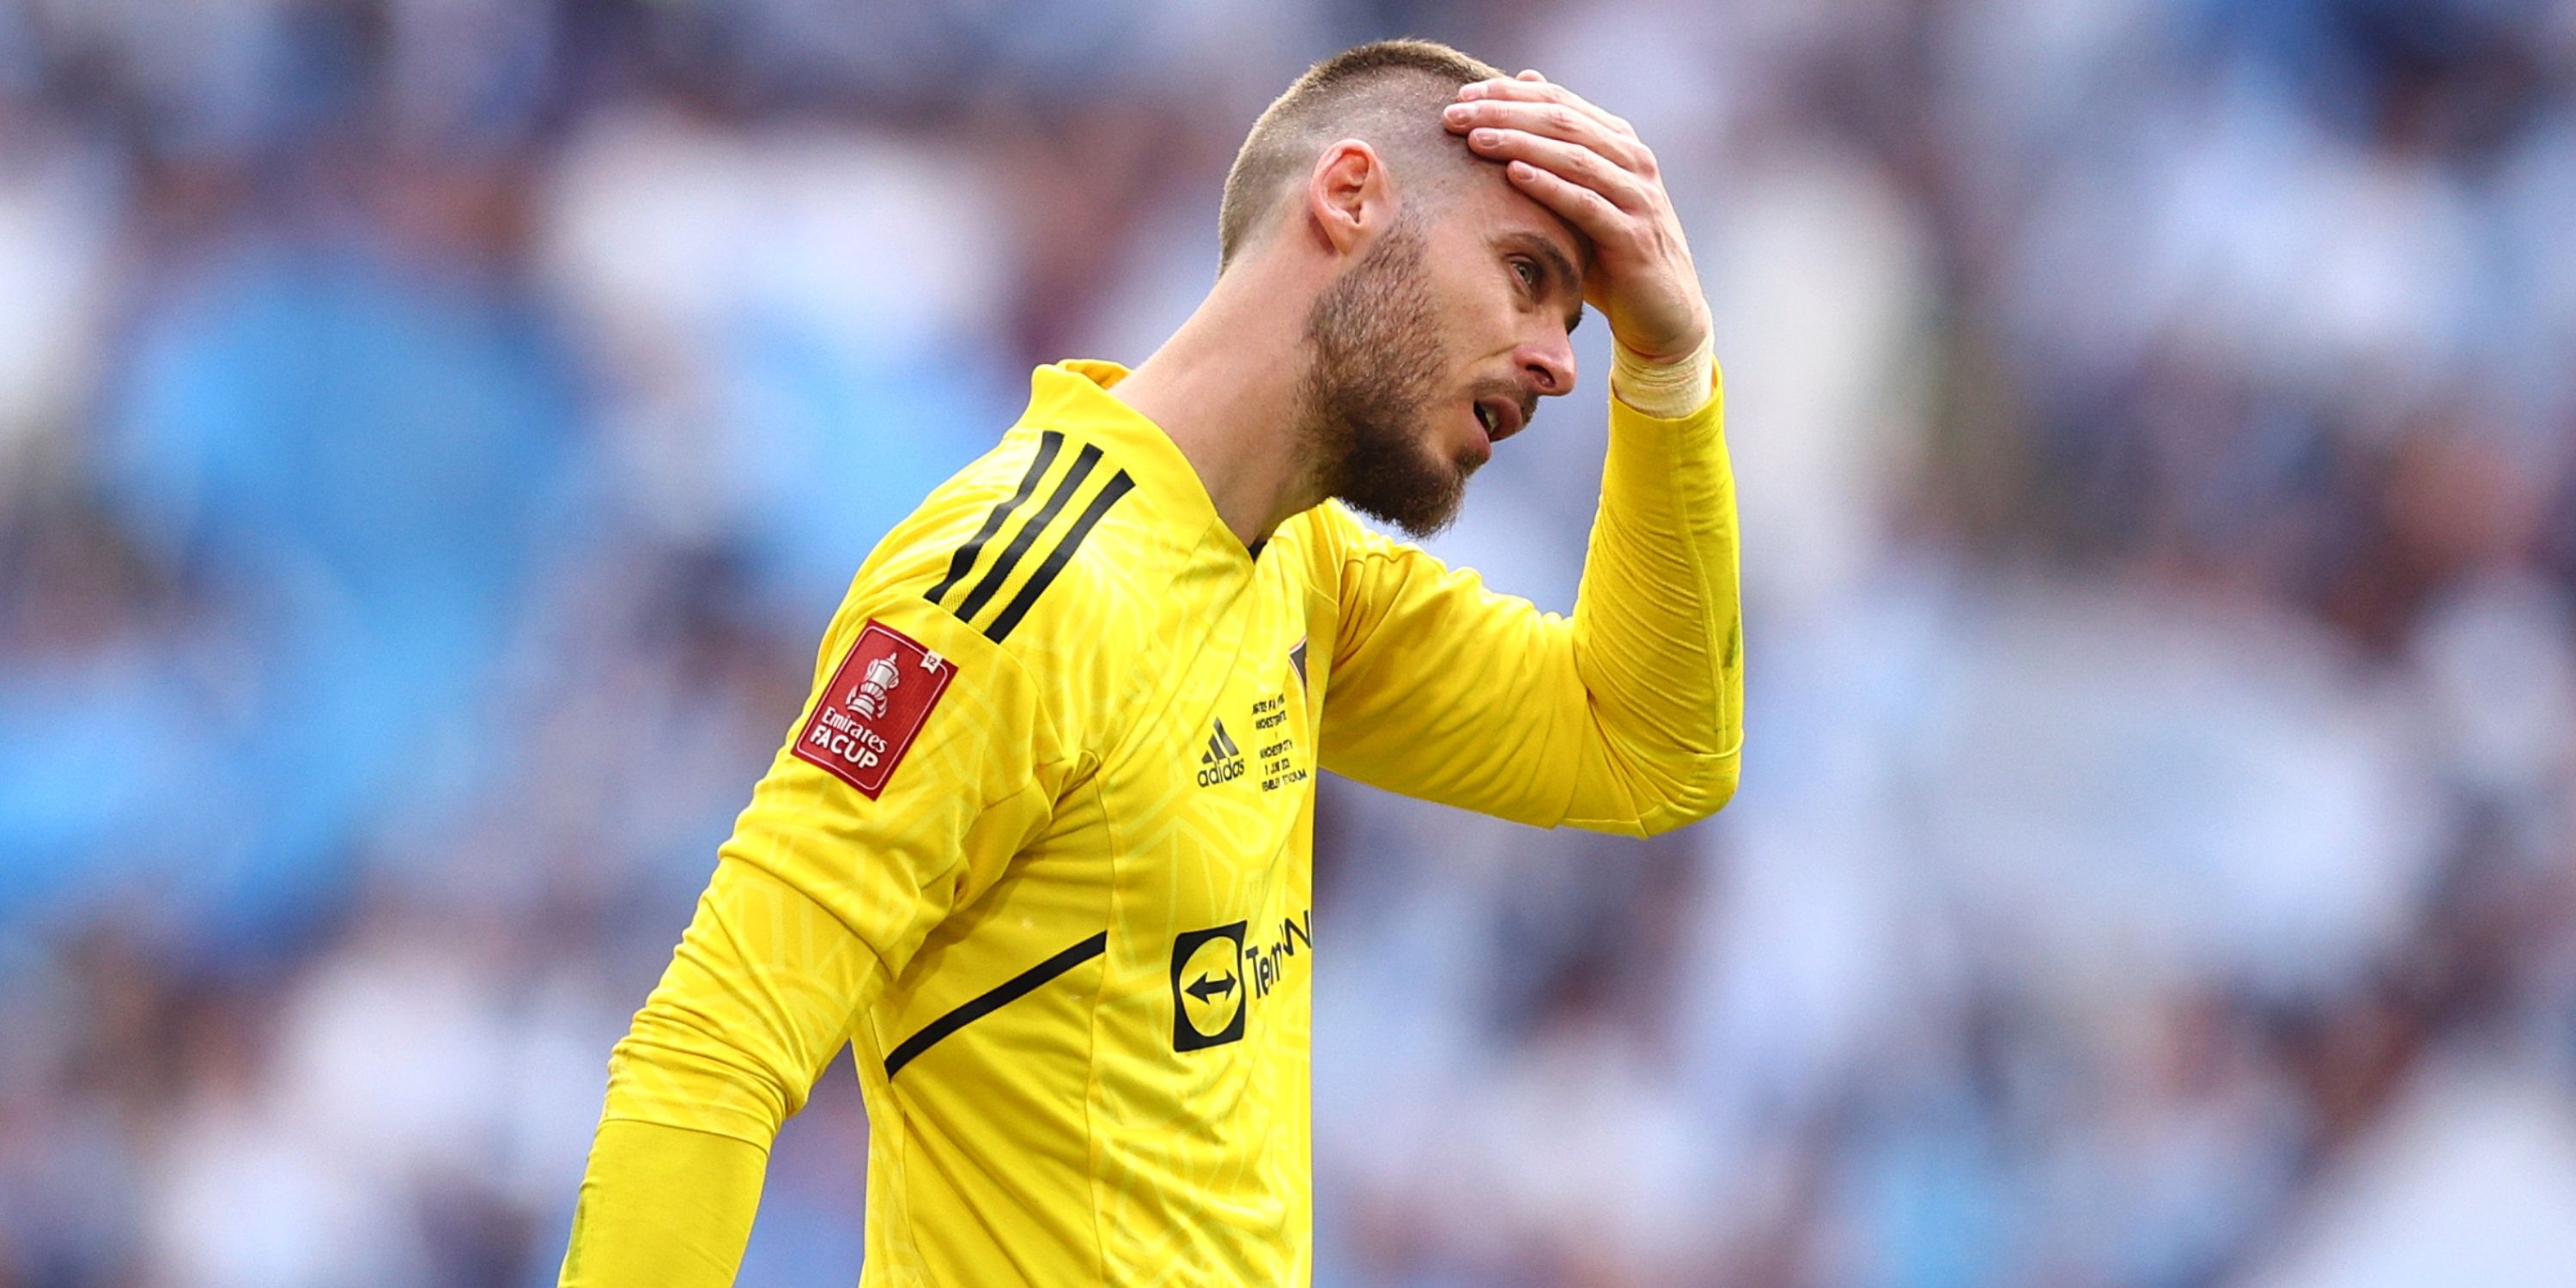  David De Gea of Manchester United looks dejected following the team's defeat in the Emirates FA Cup Final.